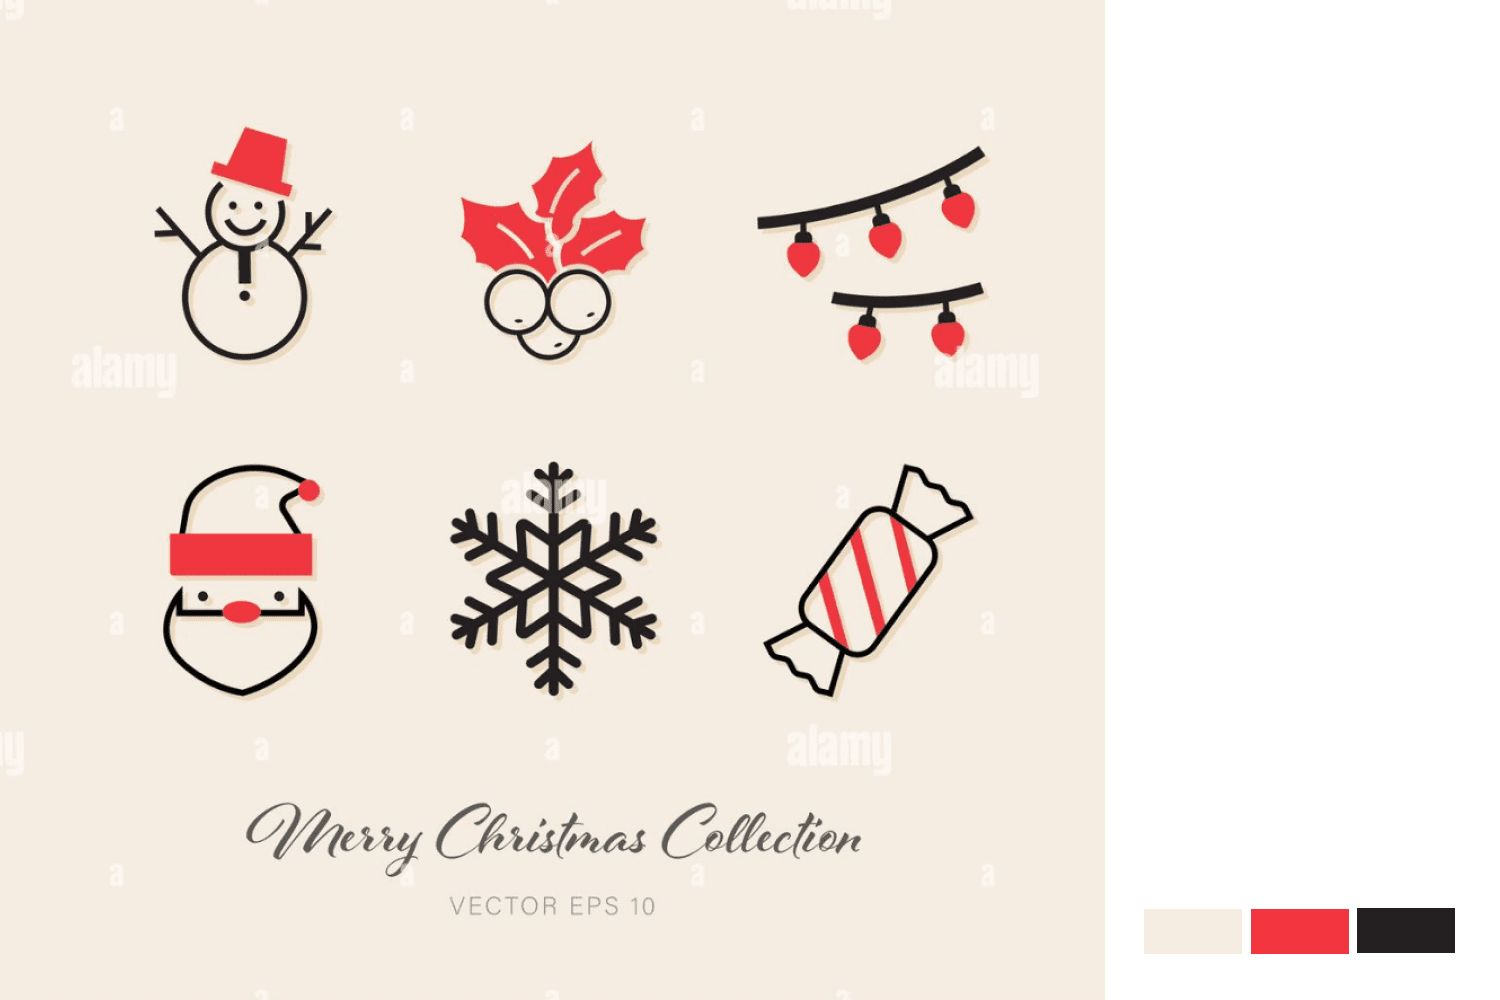 Collage of icons of snowman, snowflake, candy, Santa Claus and Christmas toys.